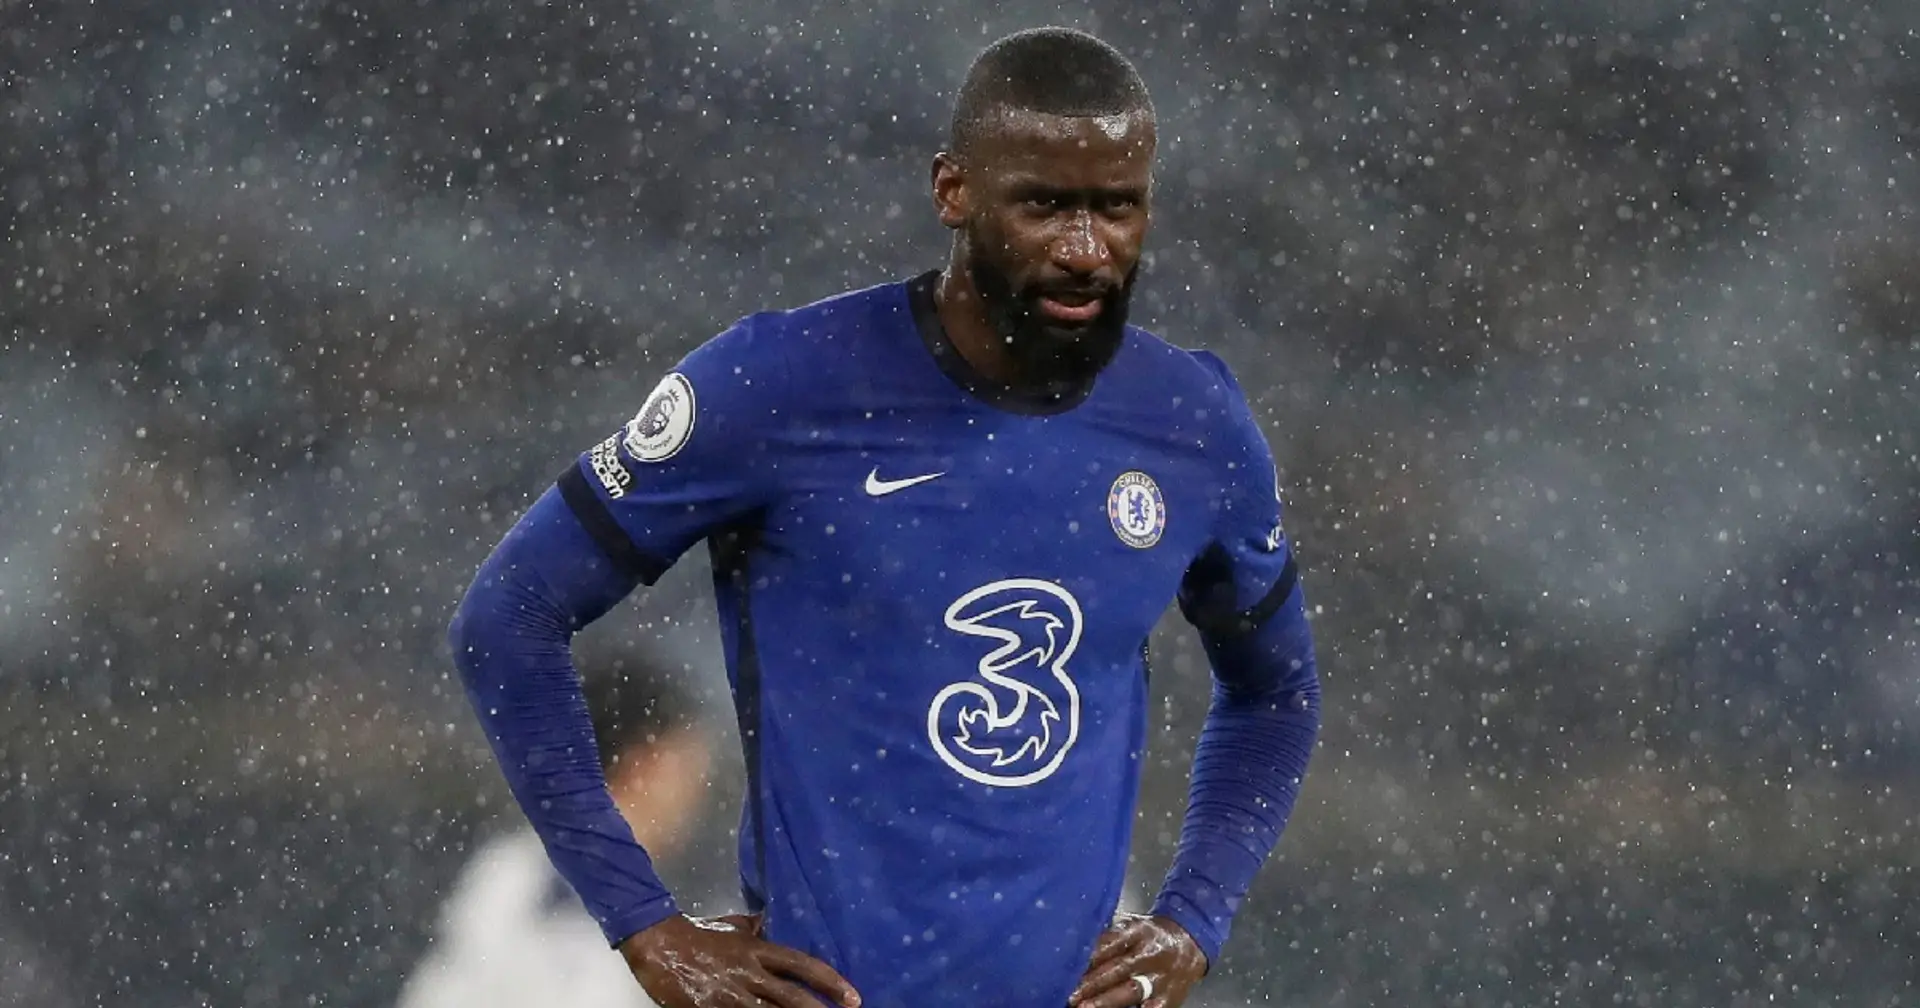 'This won't ruin our self-confidence': Antonio Rudiger sends message to Chelsea fans after FA Cup loss 